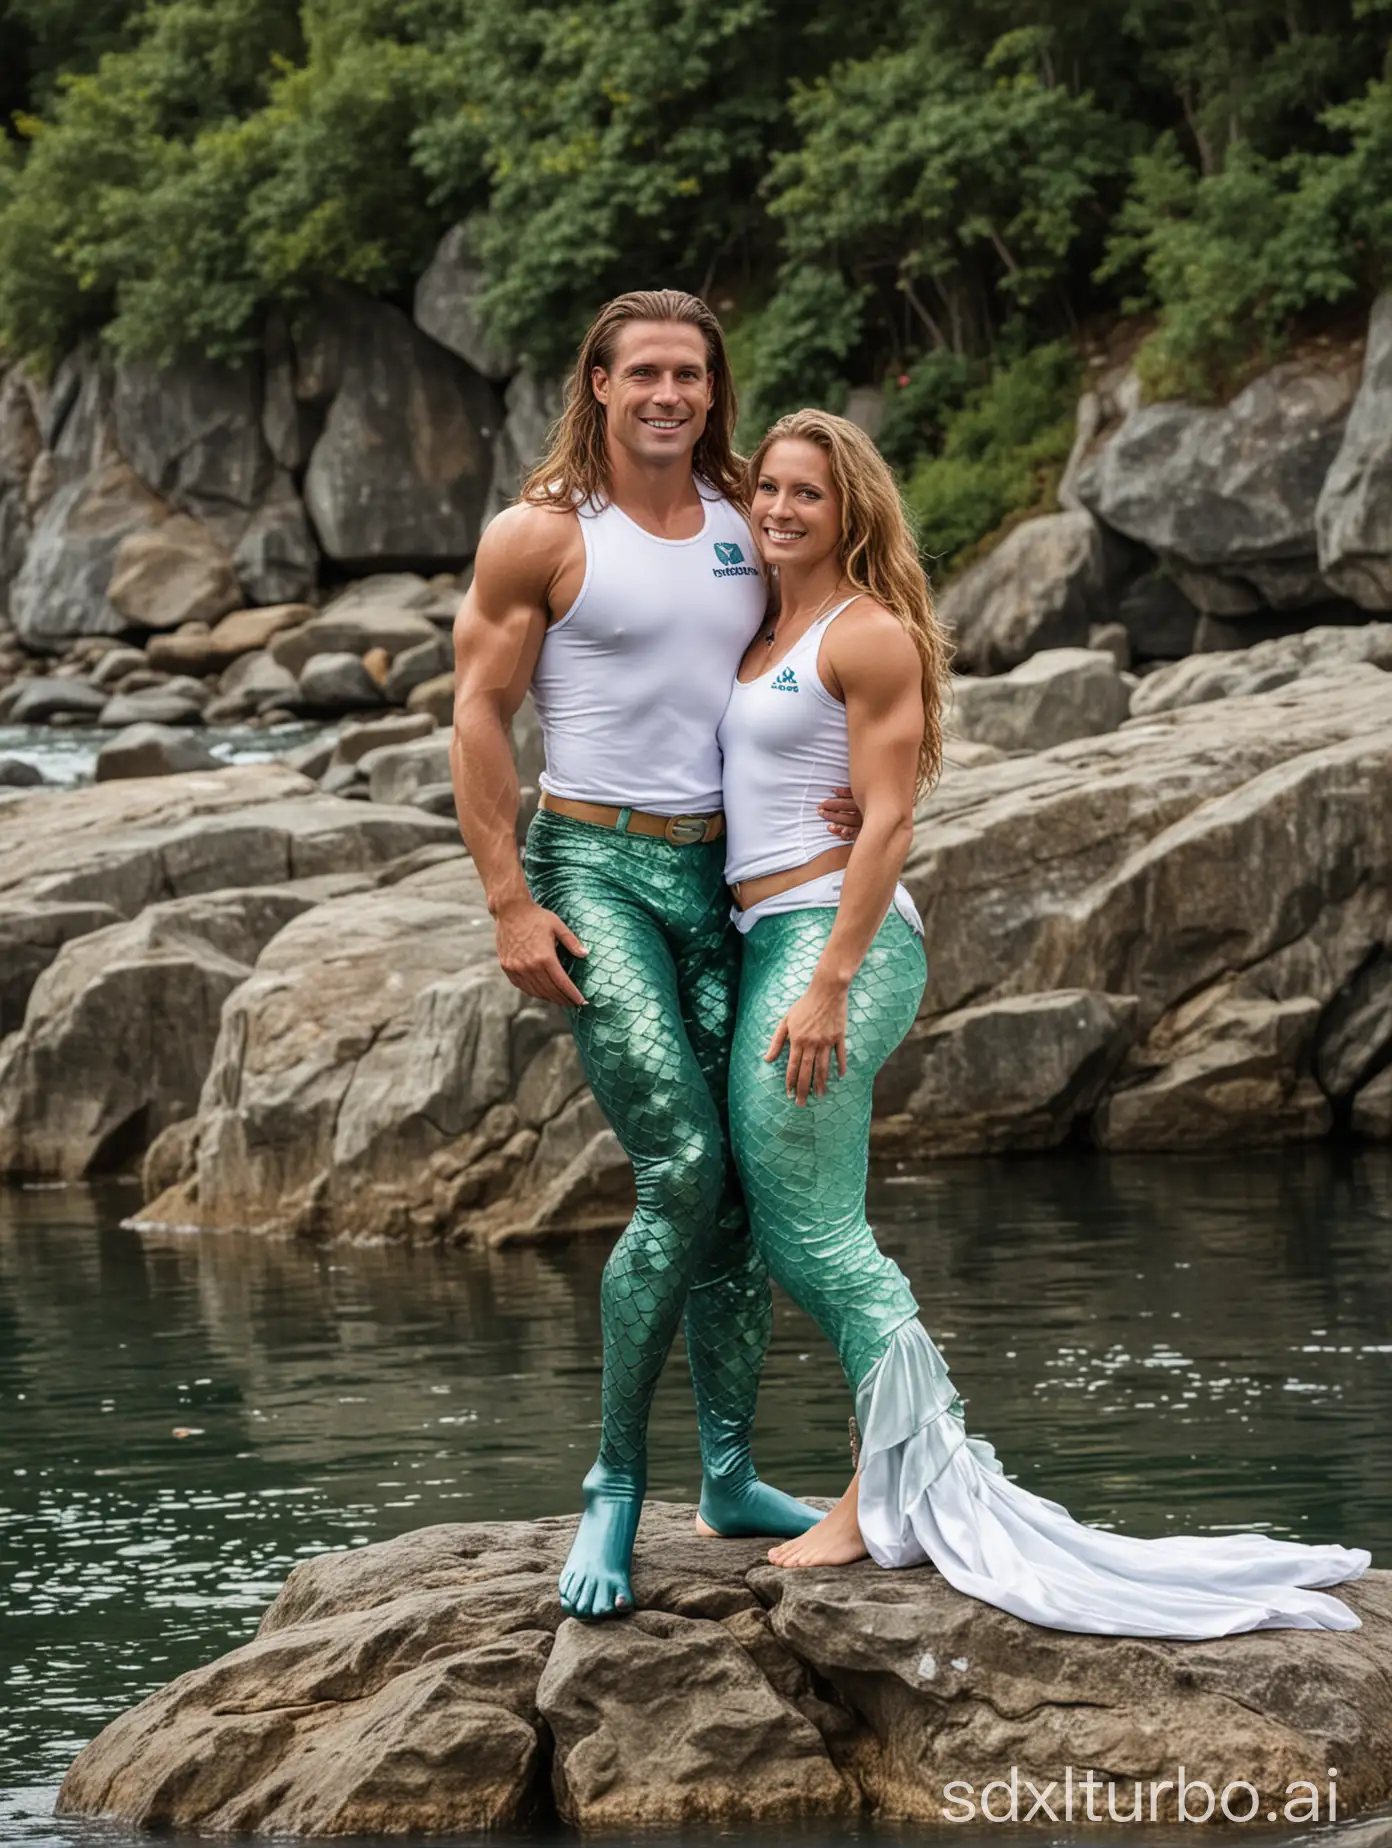 Photo of Diana Bukowski, strong olympic athlete, muscular, wearing a mermaid costume, posing on a rock with her husband Greg Orson, an accountant, wearing a white shirt. They're enjoying, it's very heart warming and happy.